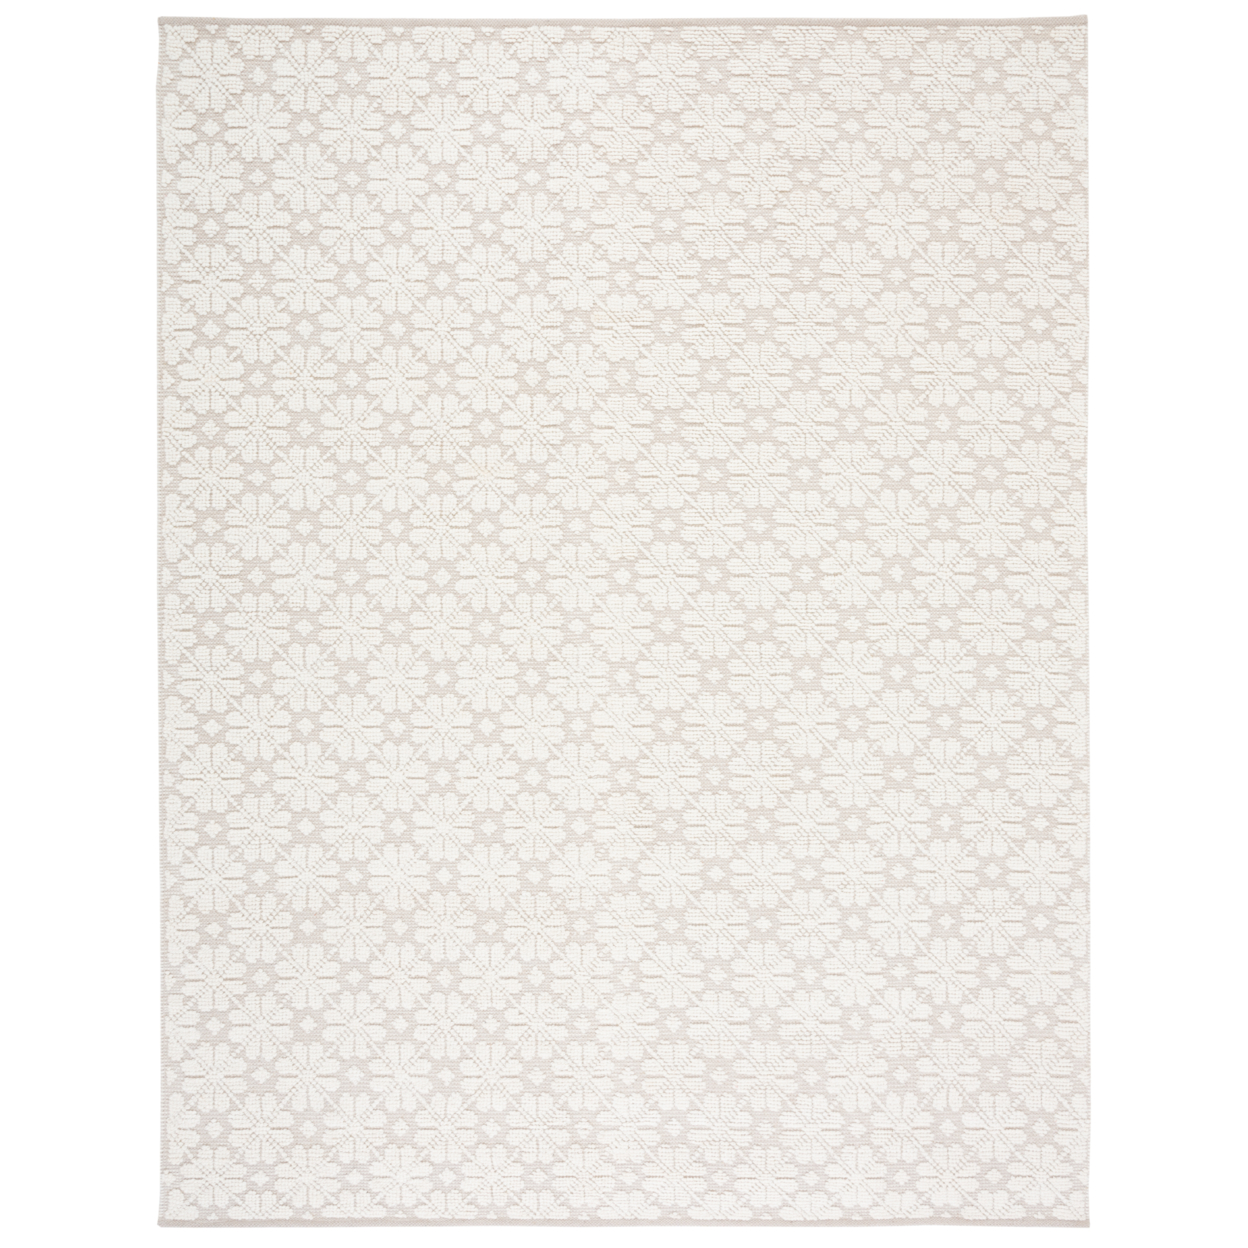 SAFAVIEH Vermont Collection VRM106A Handwoven Ivory Rug - 8 X 10